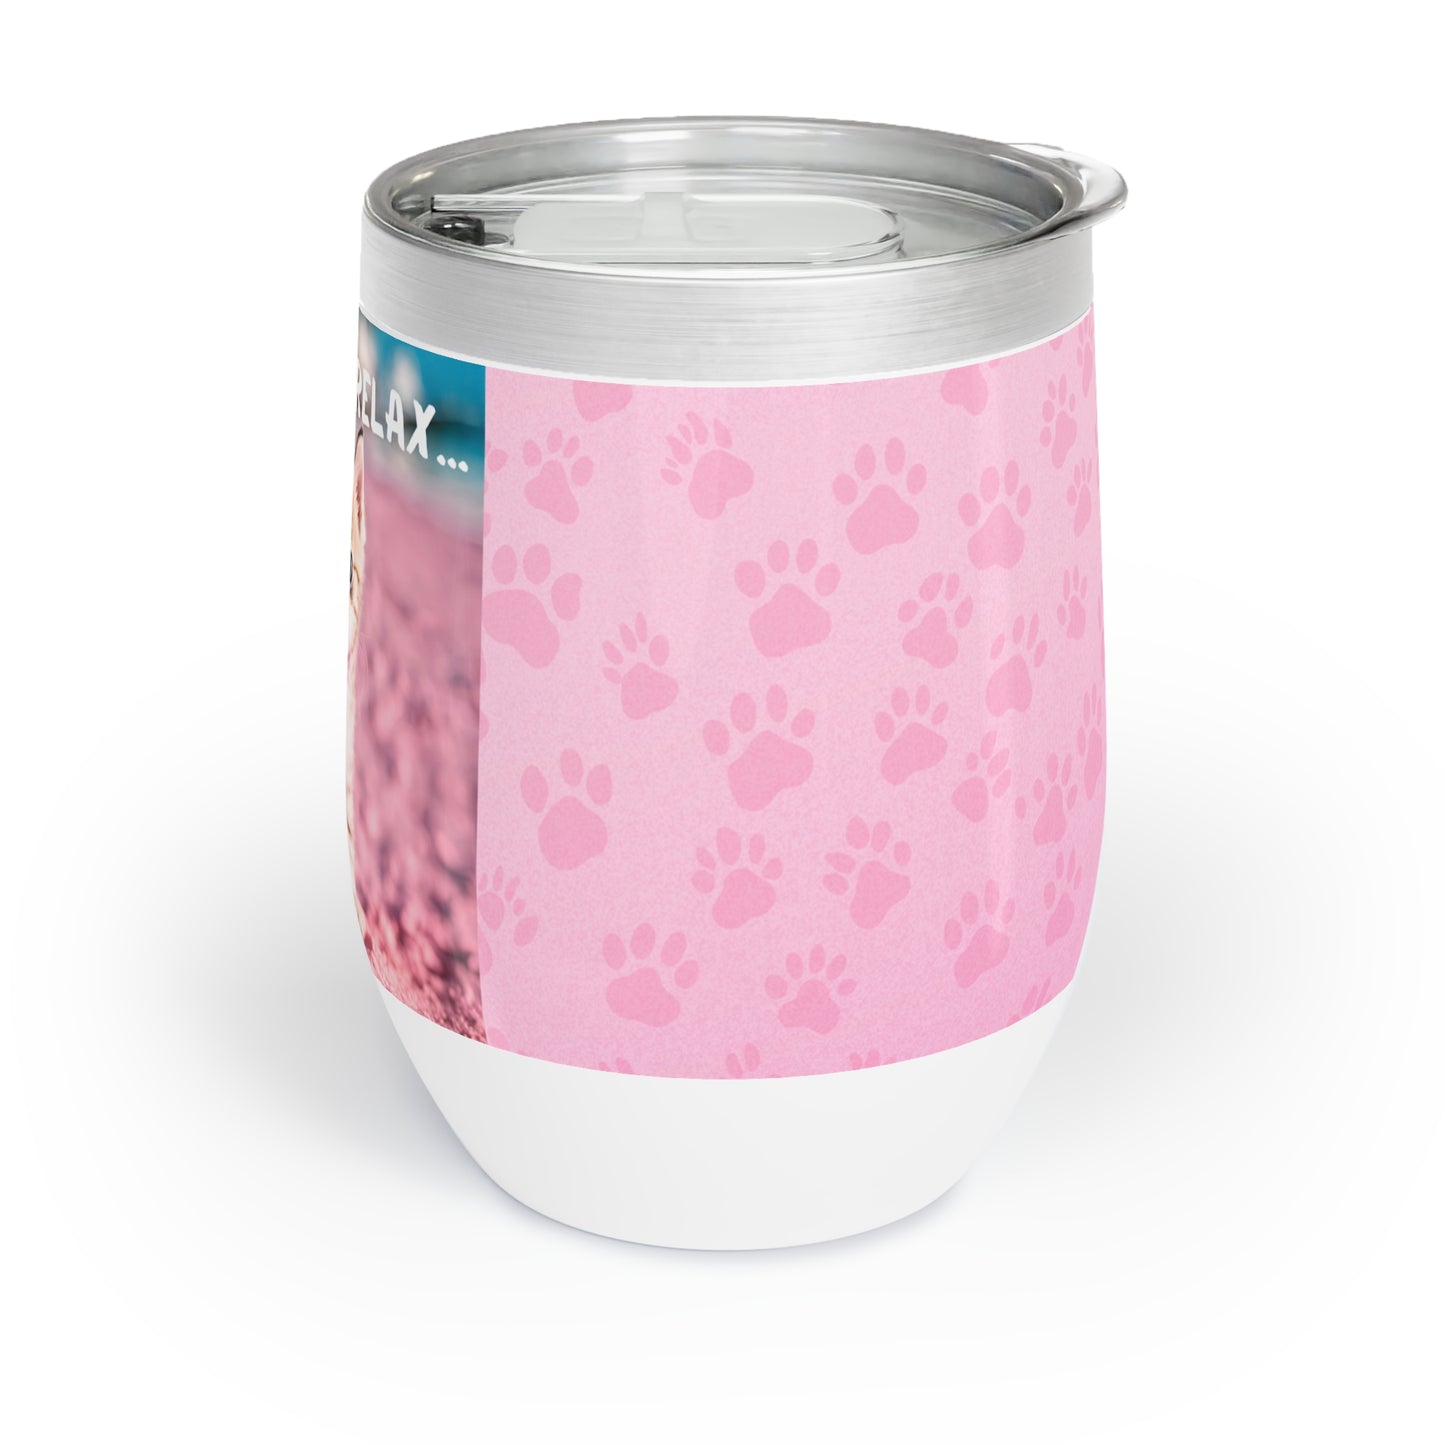 Adorable Kitten Wine Tumbler – Perfect for Cat Lovers and Wine Enthusiasts, 12 oz